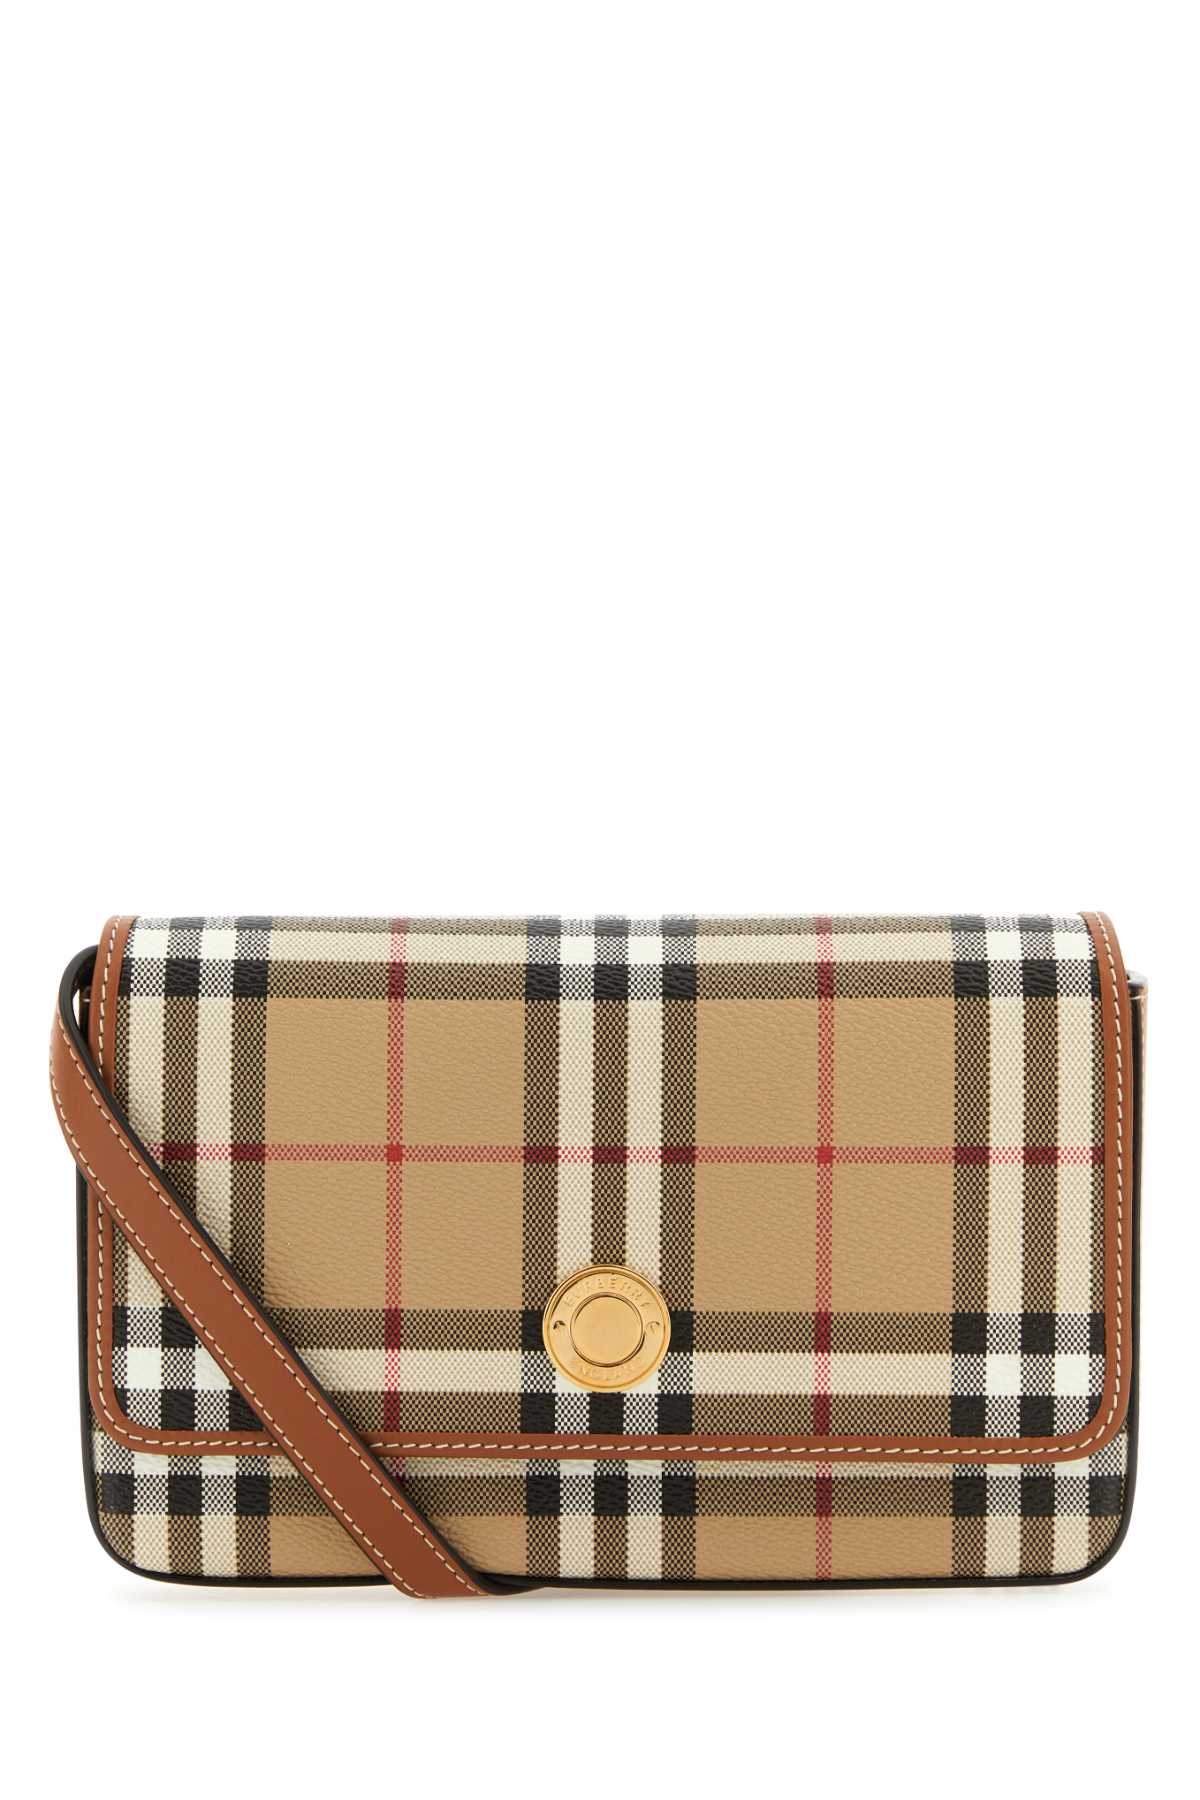 Shop Burberry Printed Canvas Hampshire Crossbody Bag In Archivebeige